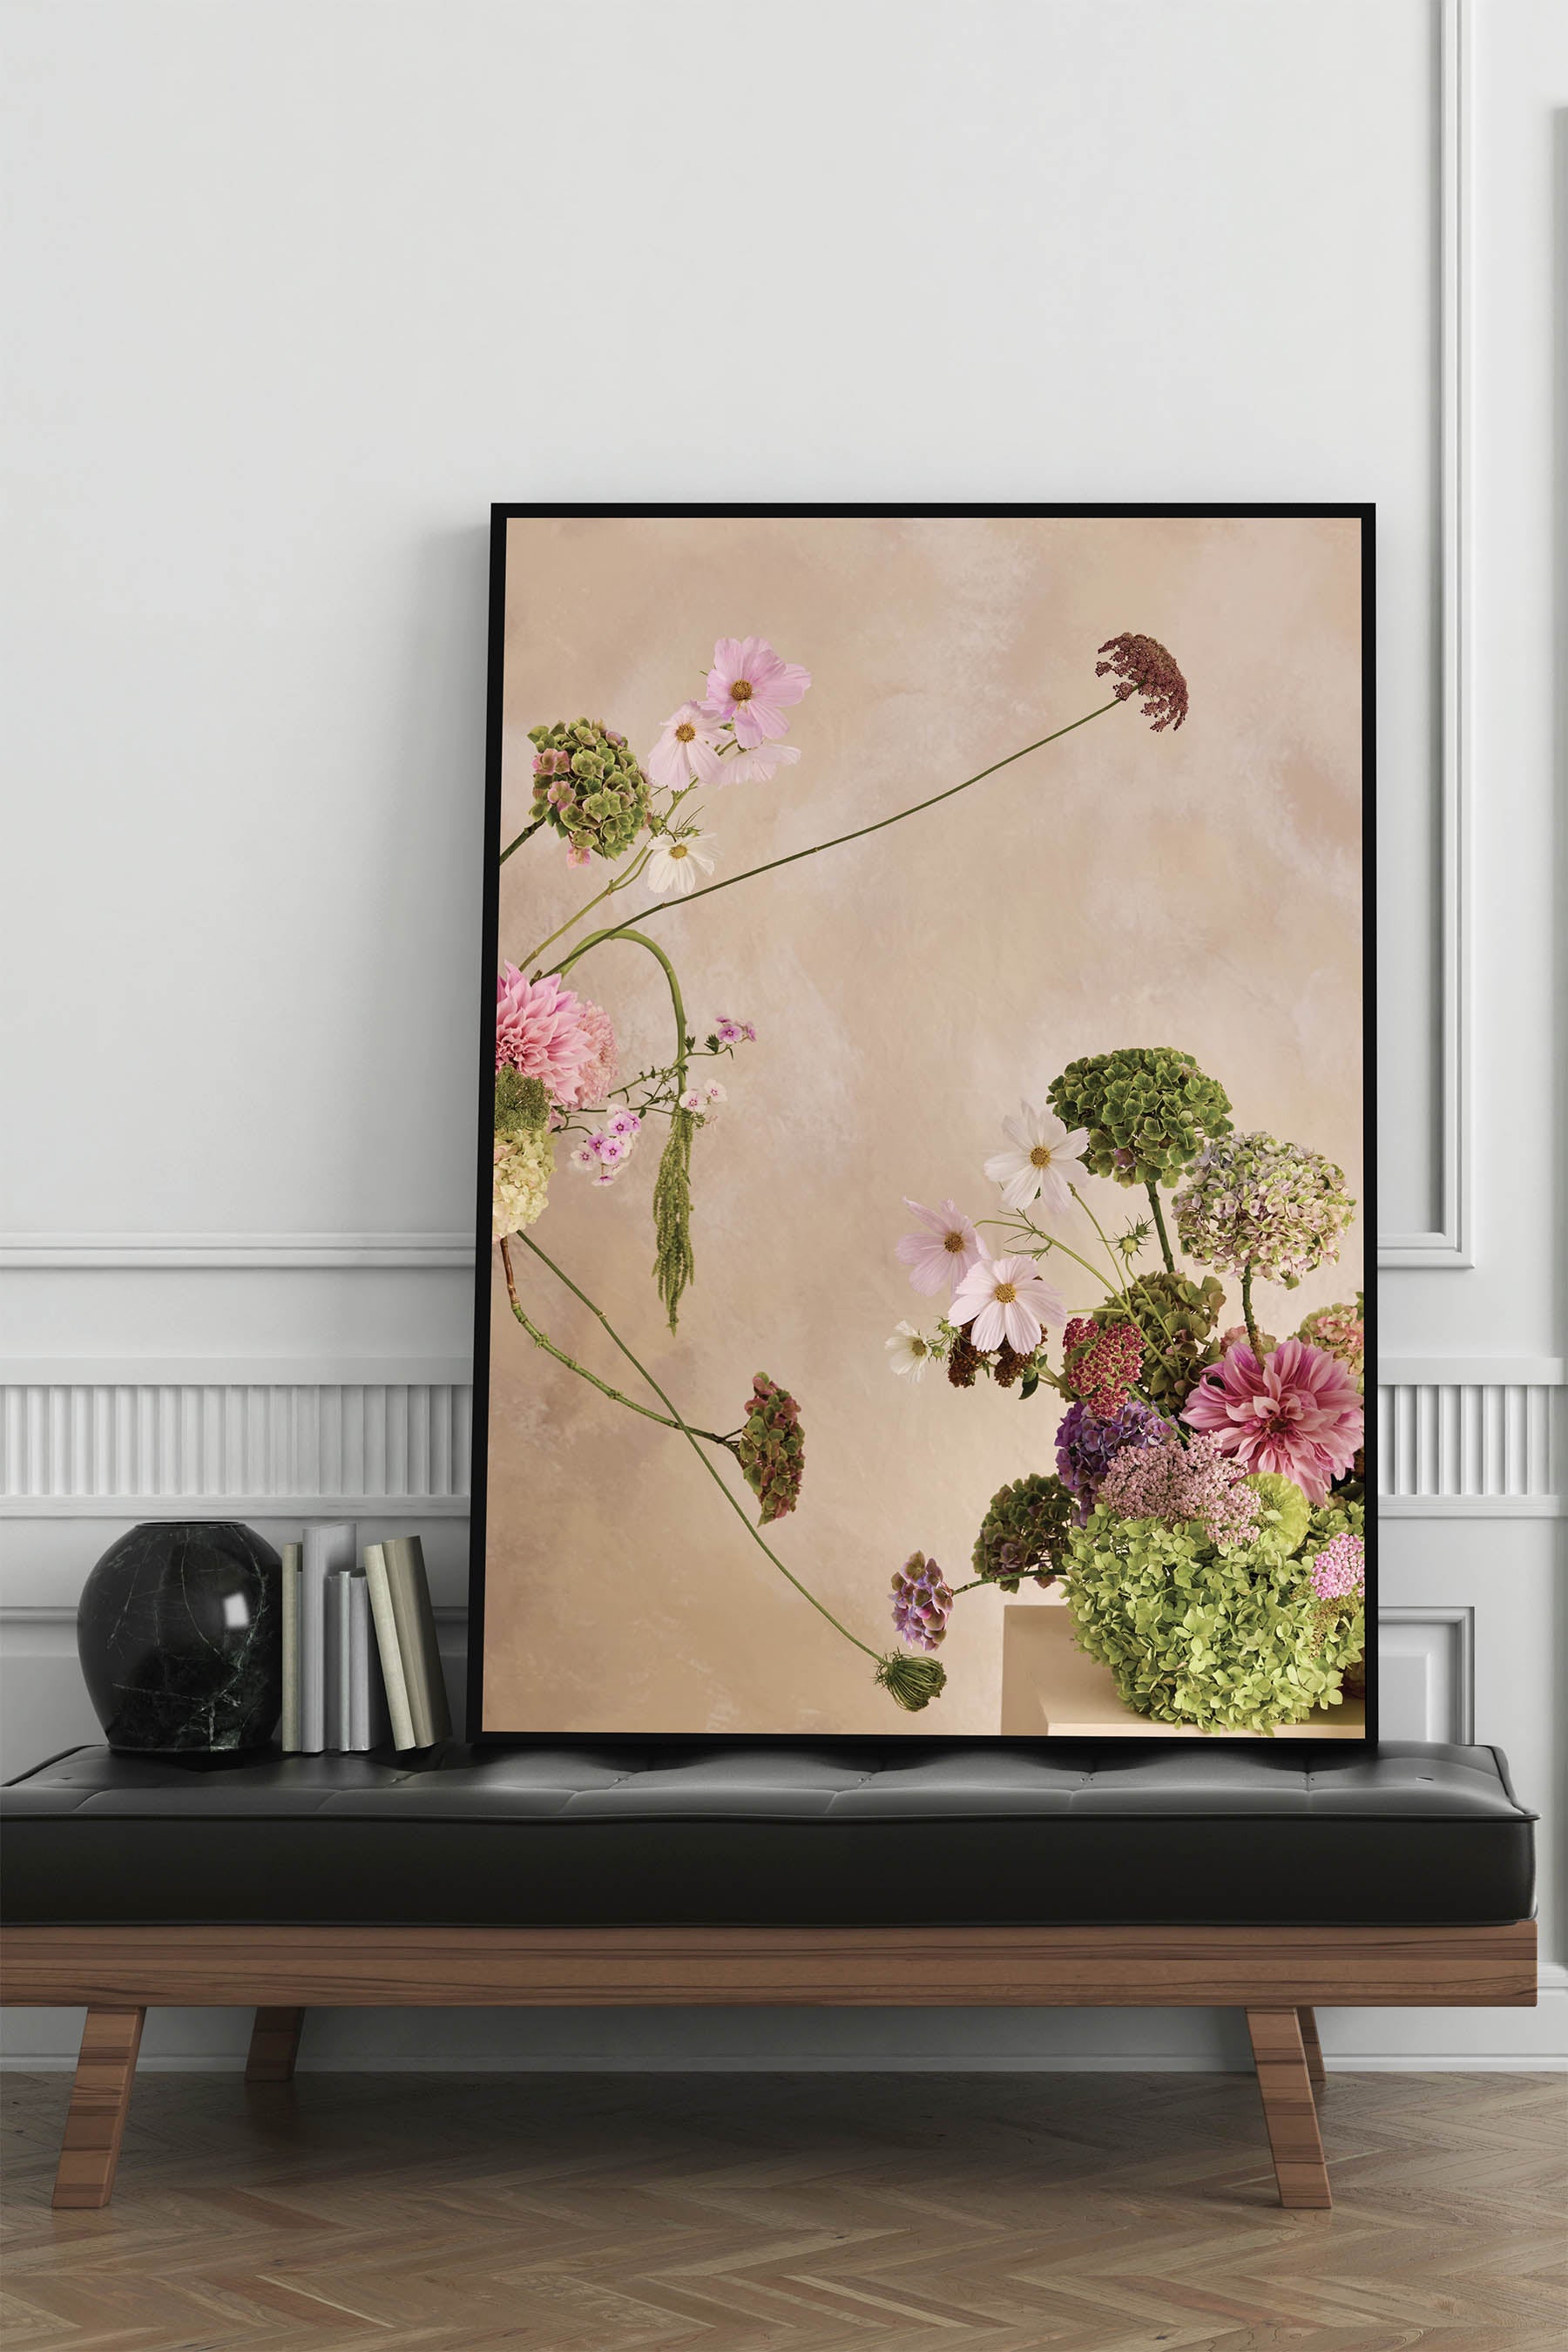 Whimsical Floral Abstract Arrangement against a Linen colour hand painted background Fine Art Print By Austin Bloom on a leather banquette in an entryway.